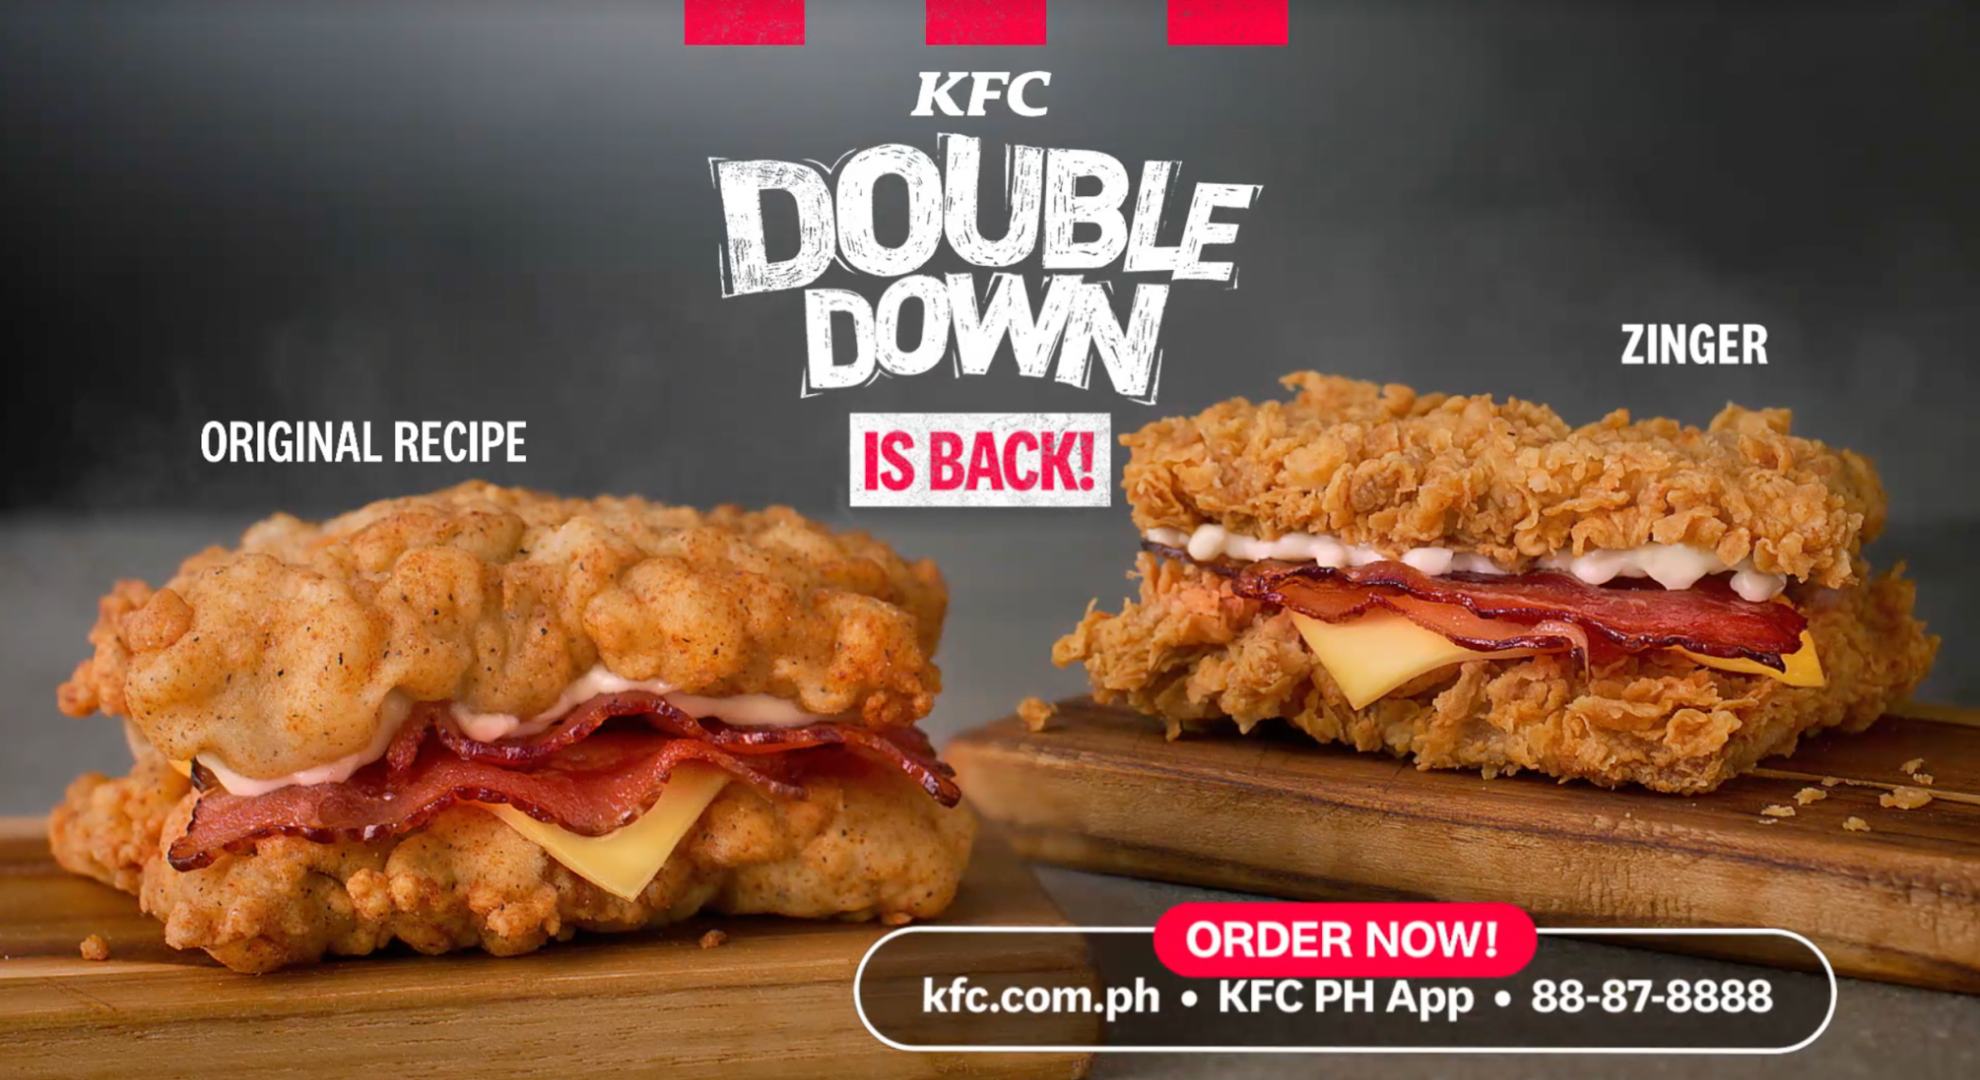 The Legend is back: KFC’s Double Down